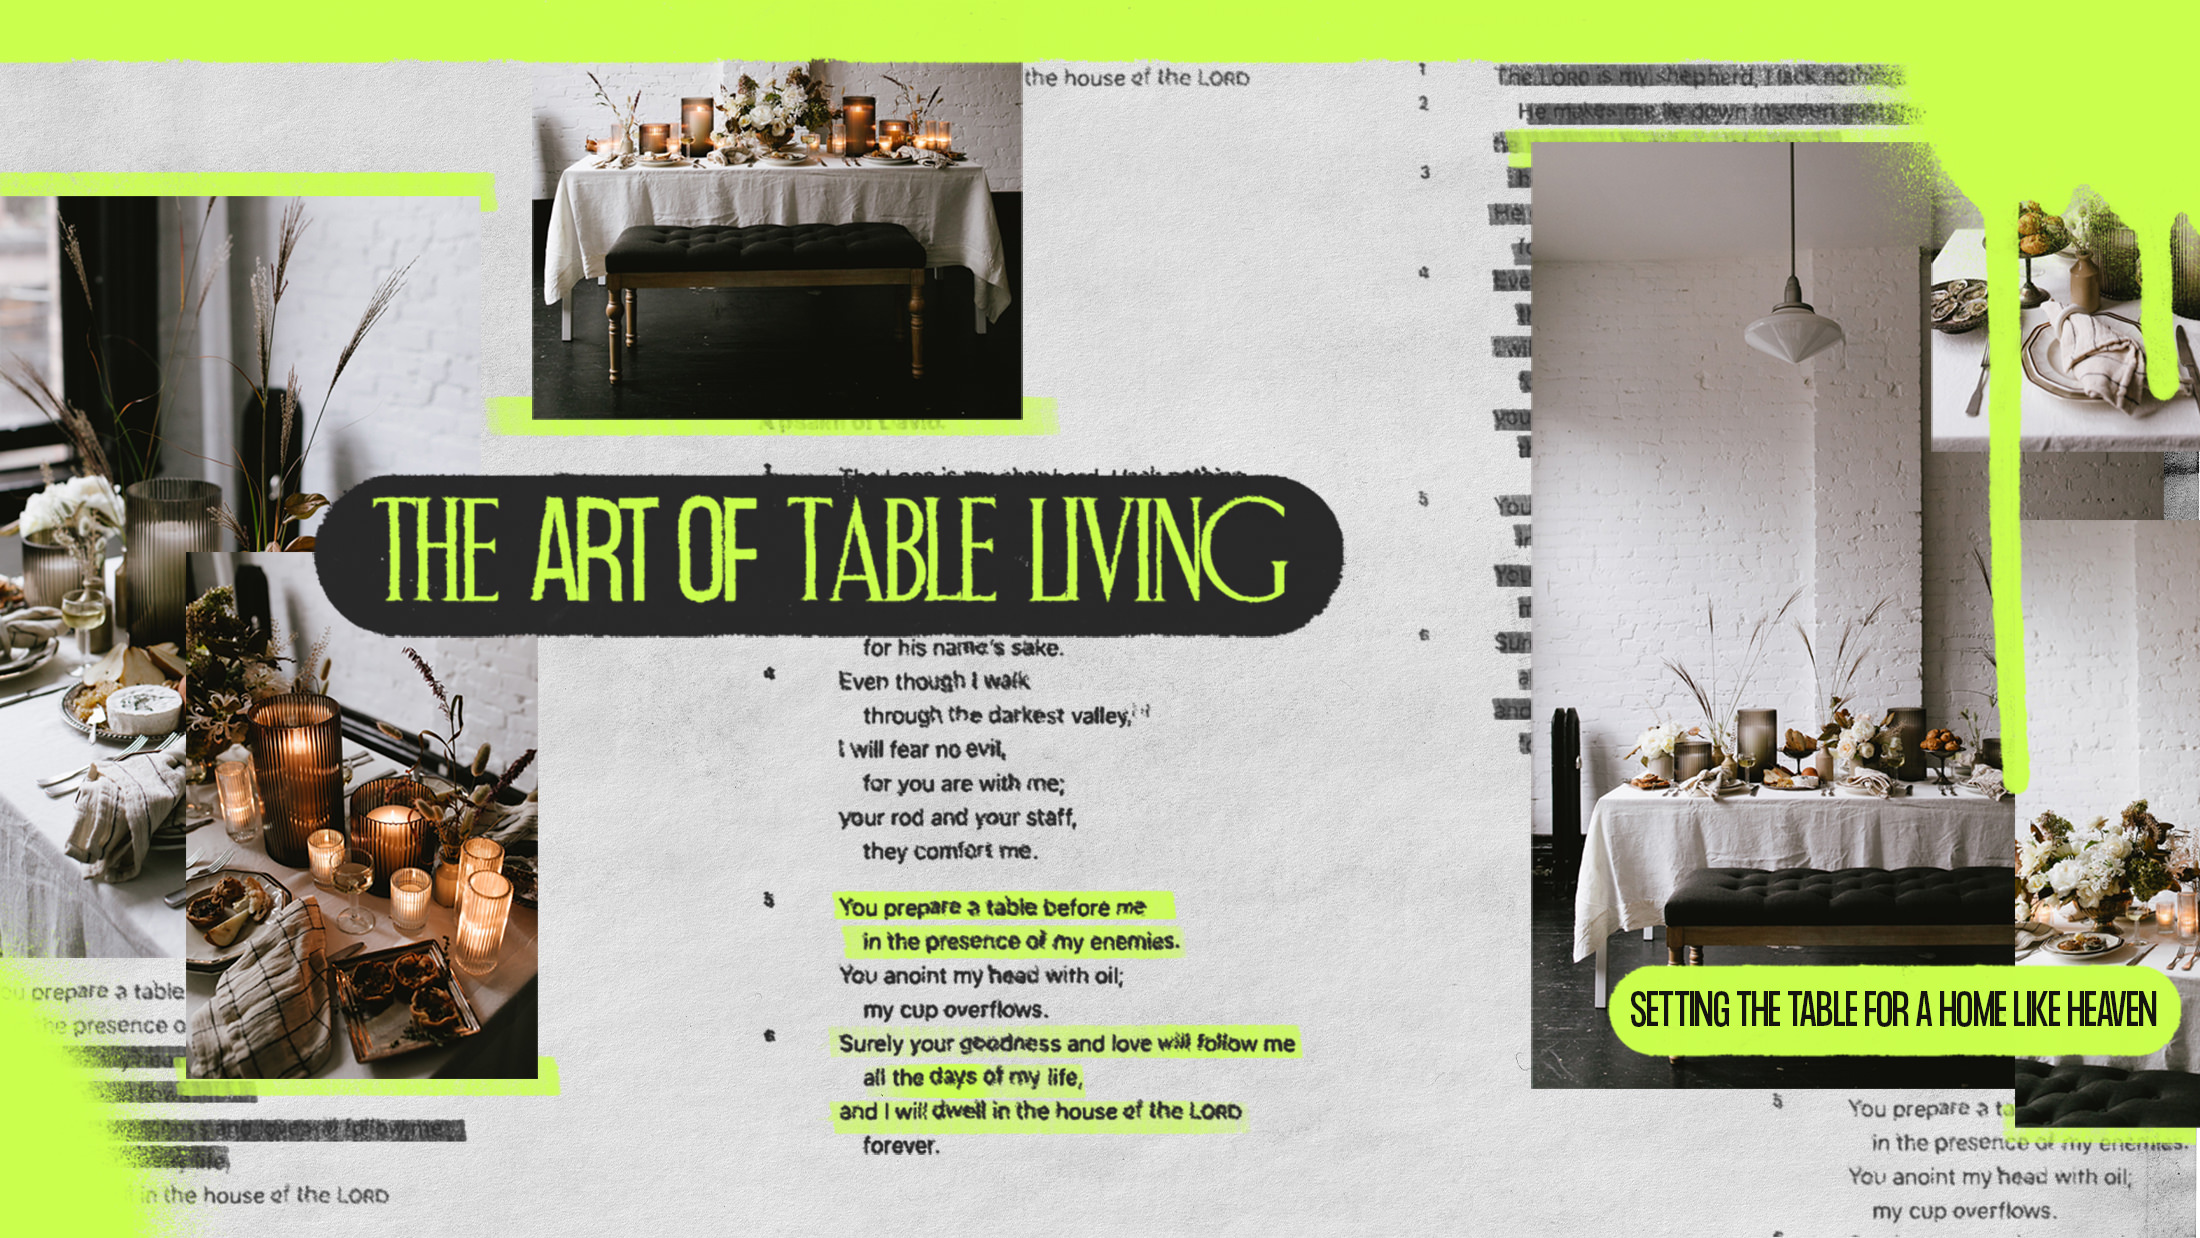 The Art of Table Living